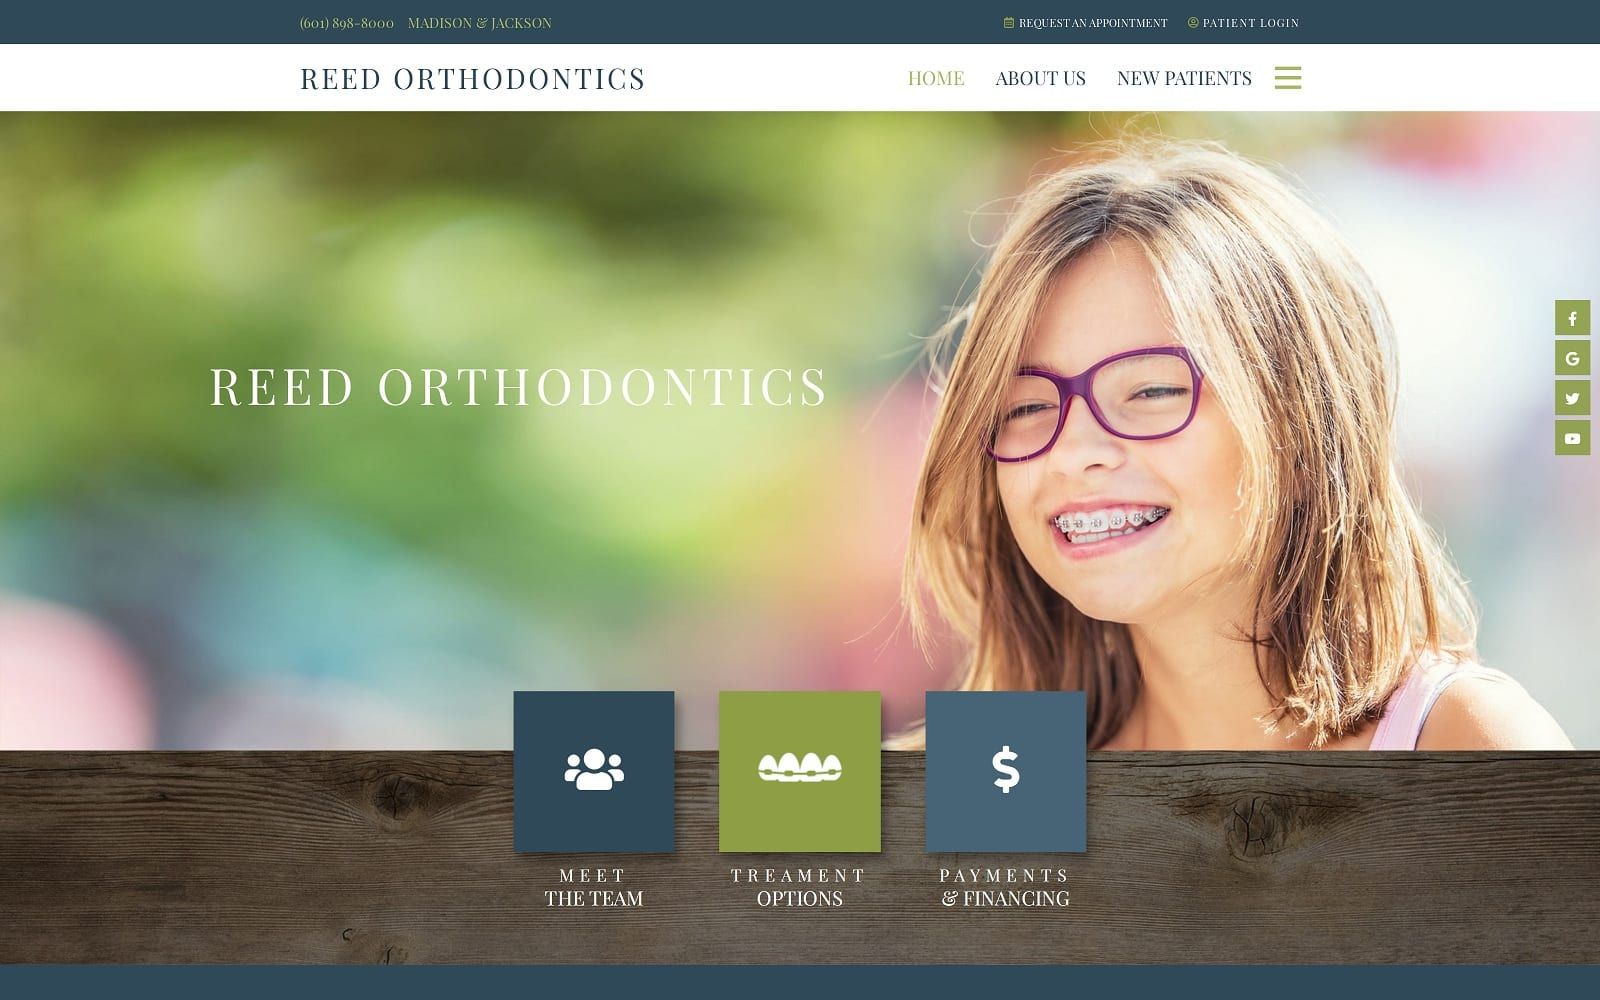 The screenshot of reed orthodontics noelreed. Com dr. Reed website